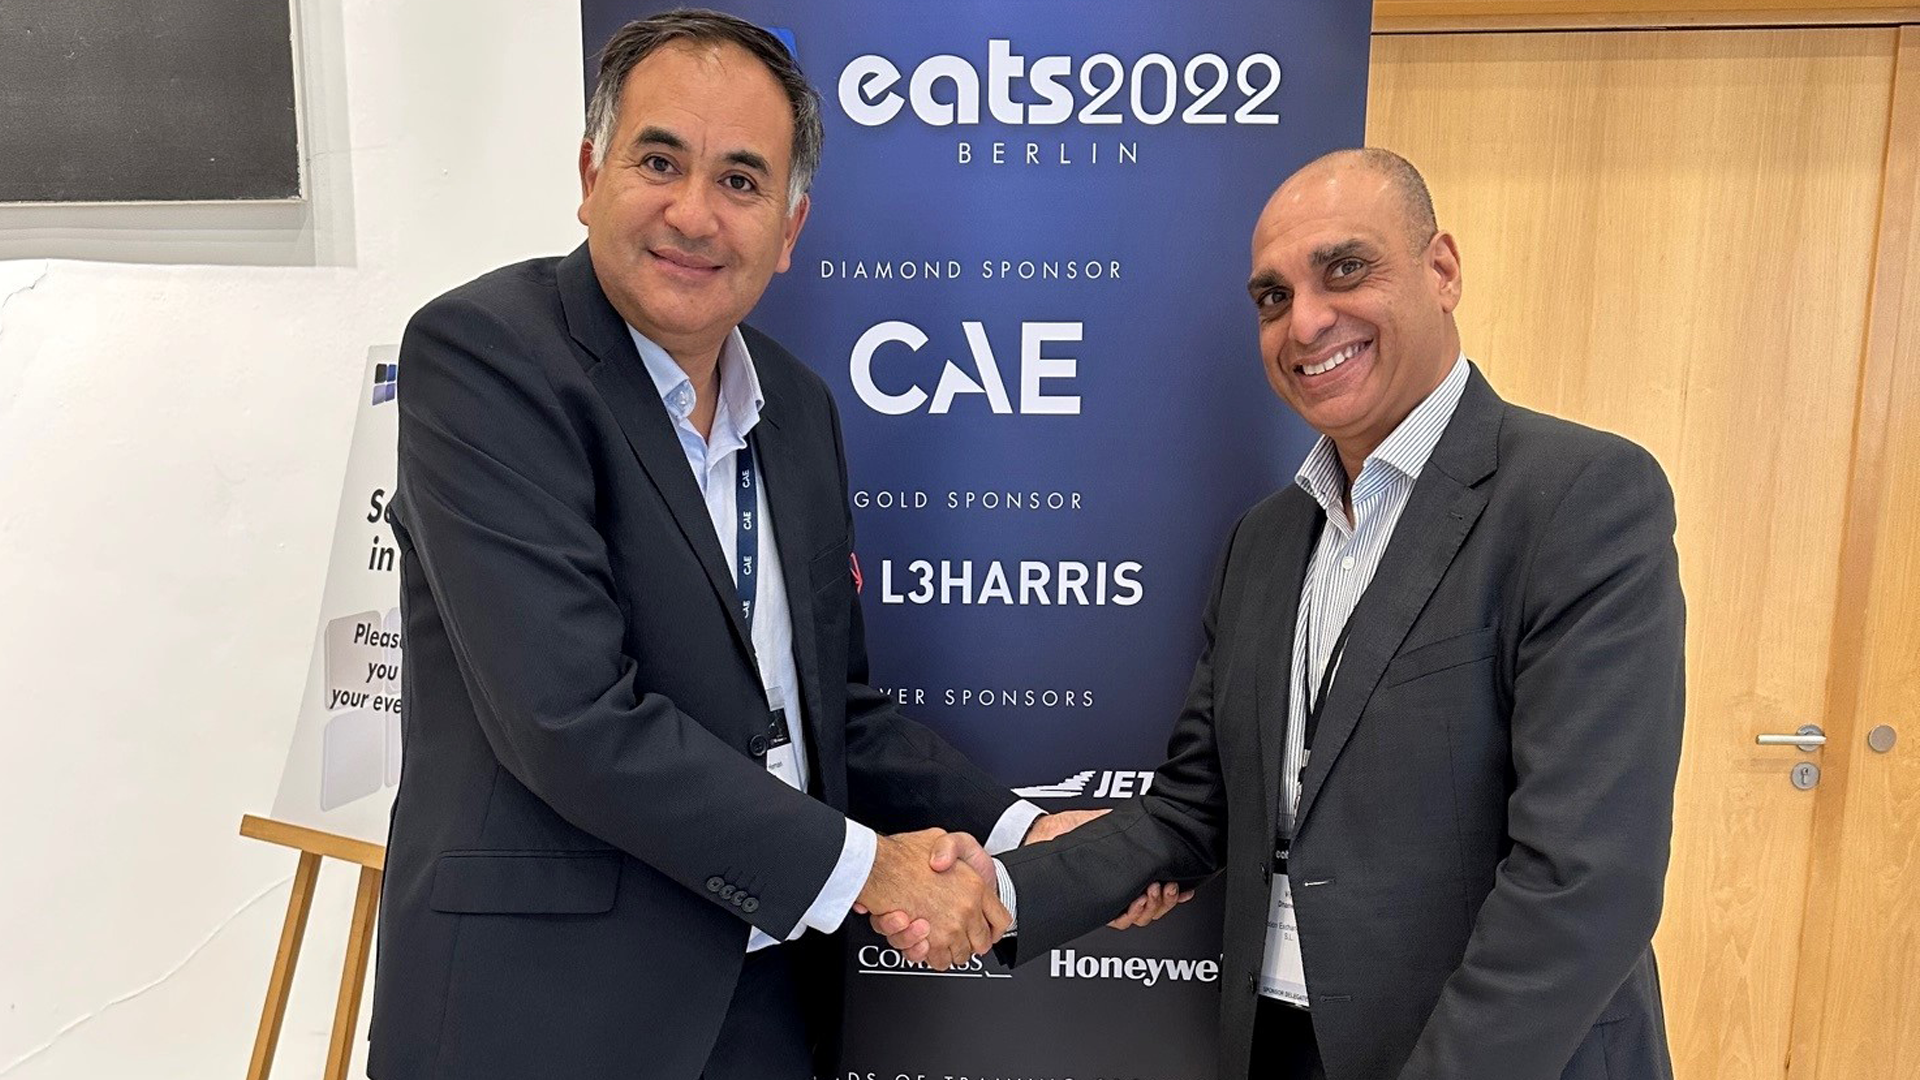 Partnership agreements concluded at EATS2022